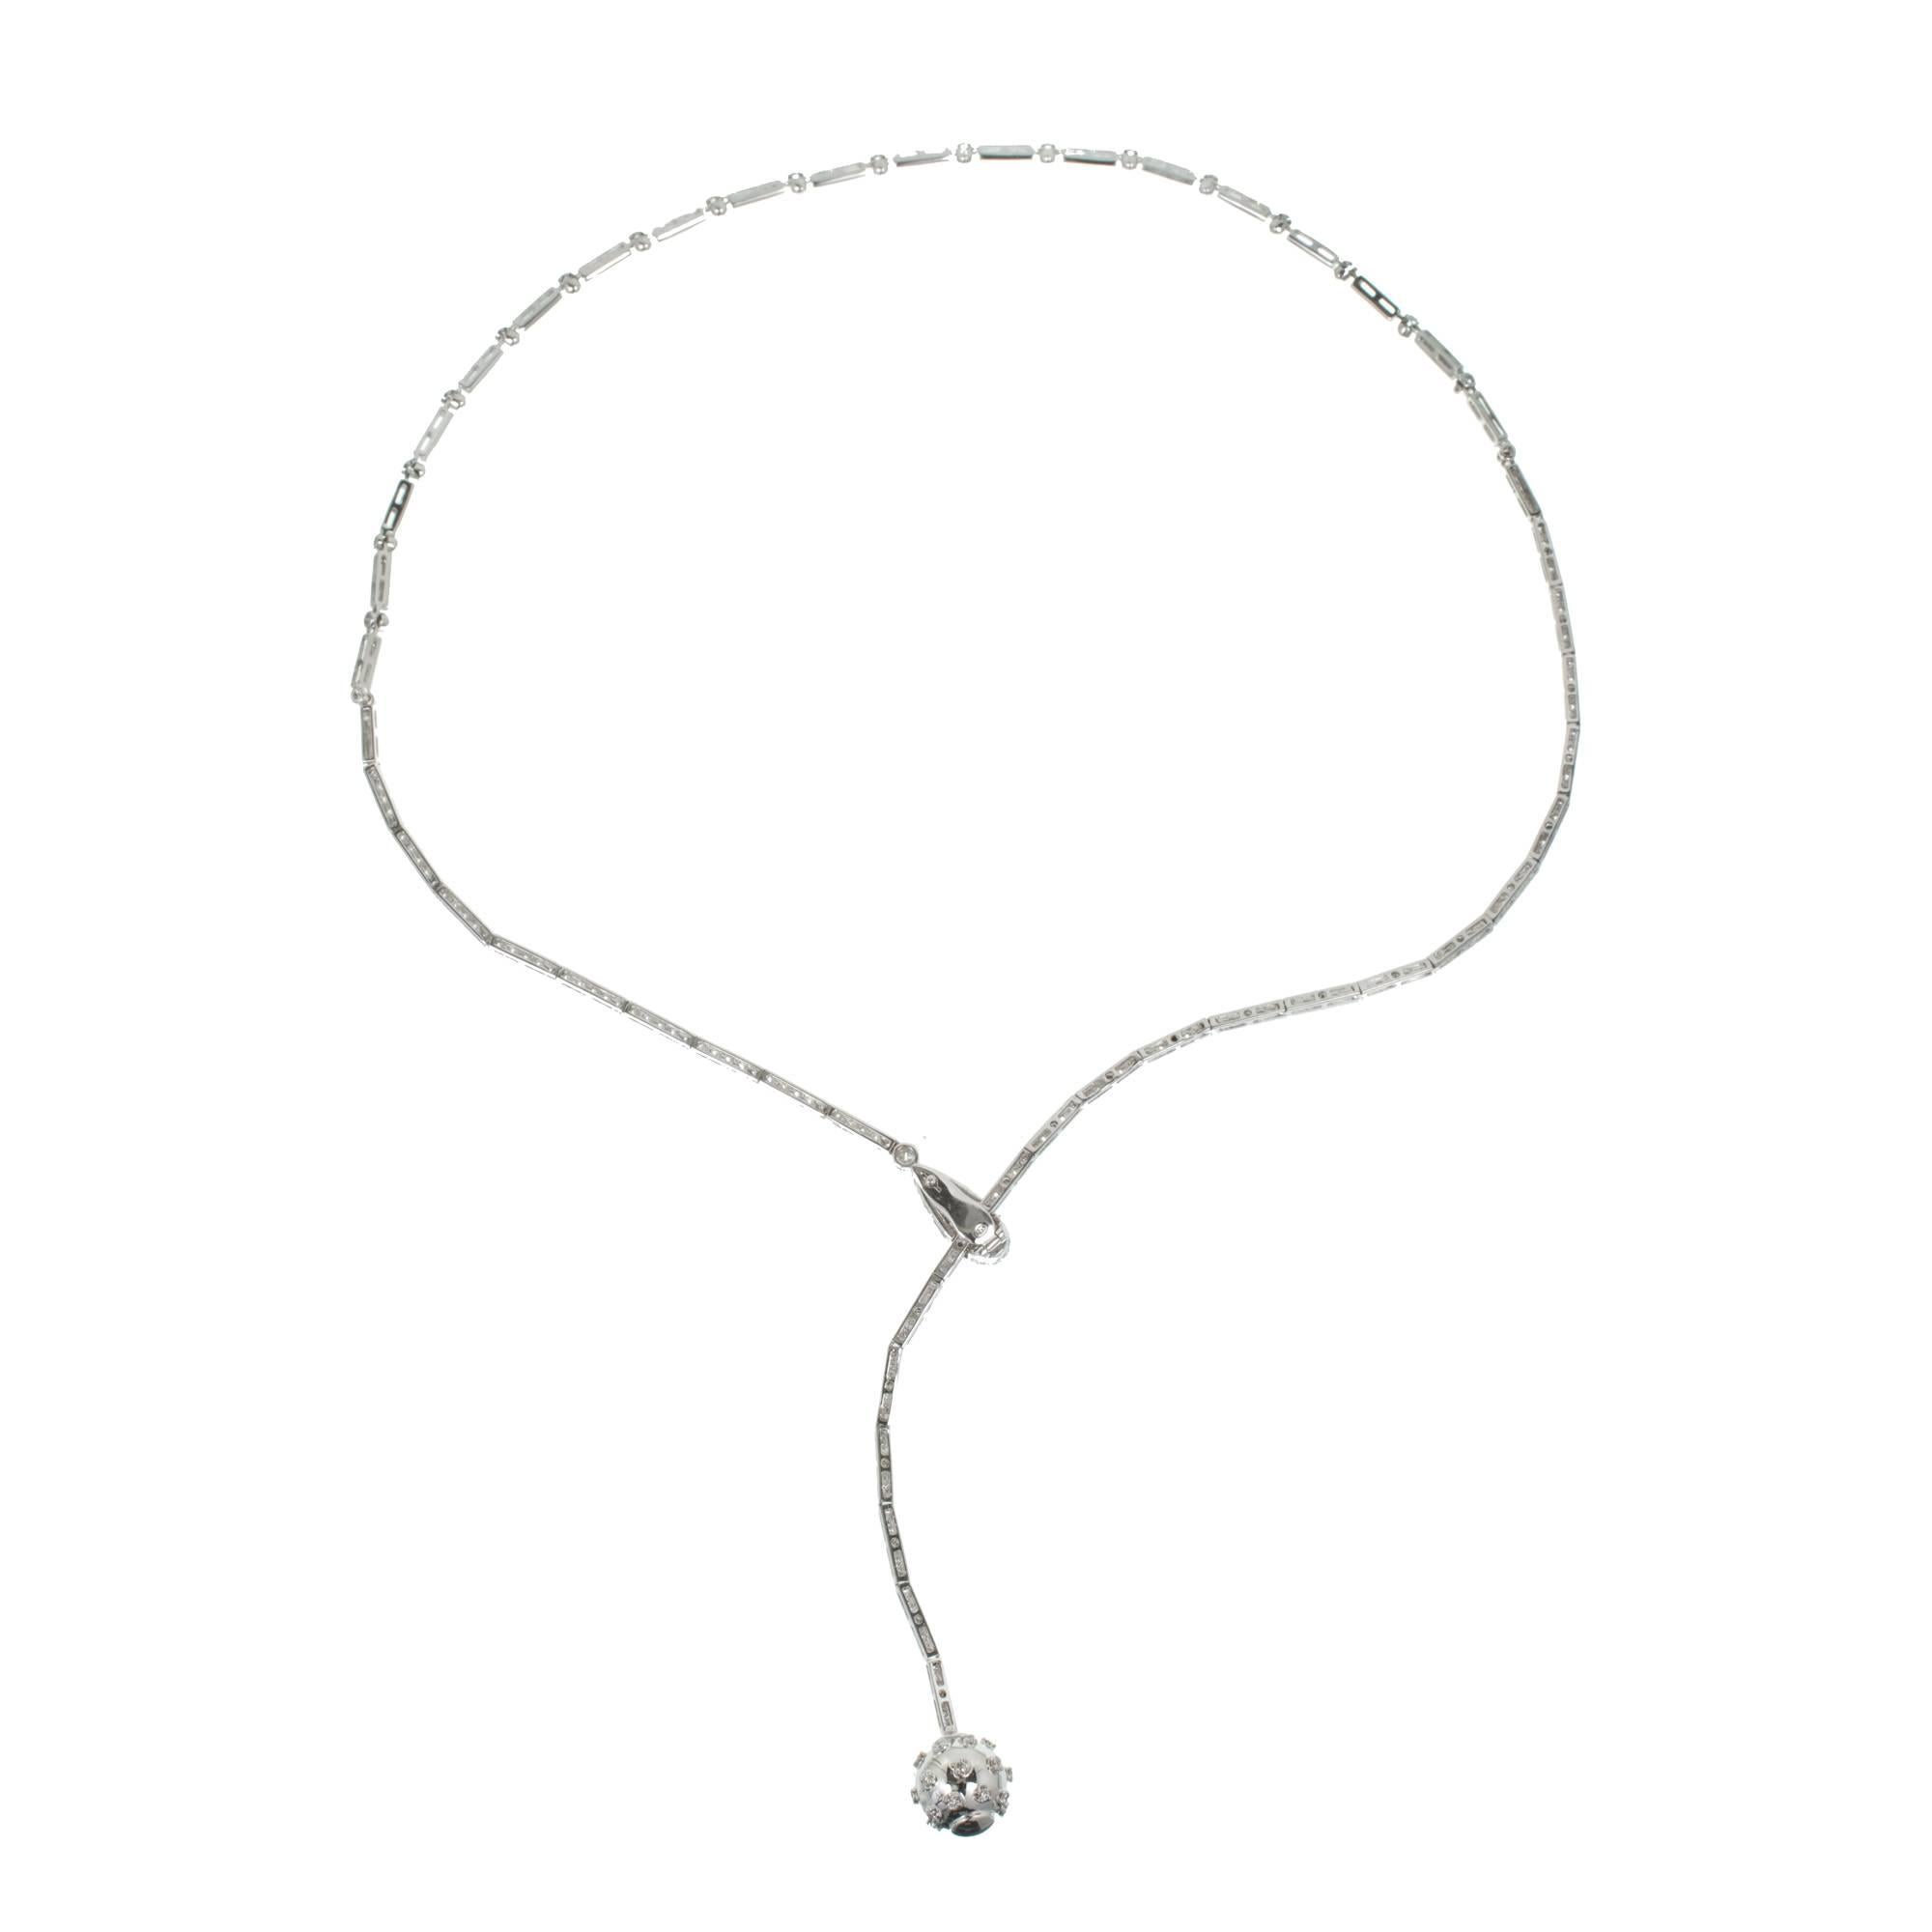 Adjustable 18k white gold diamond drop necklace. Secure pave catch allows wear from 16 to 19 inches.

Approx. 120 full cut diamonds, approx. total weight 1.50cts, G-H, VS1 - SI1
18k white gold
Tested: 18k
Stamped: 750
18.1 grams
Ball diameter: